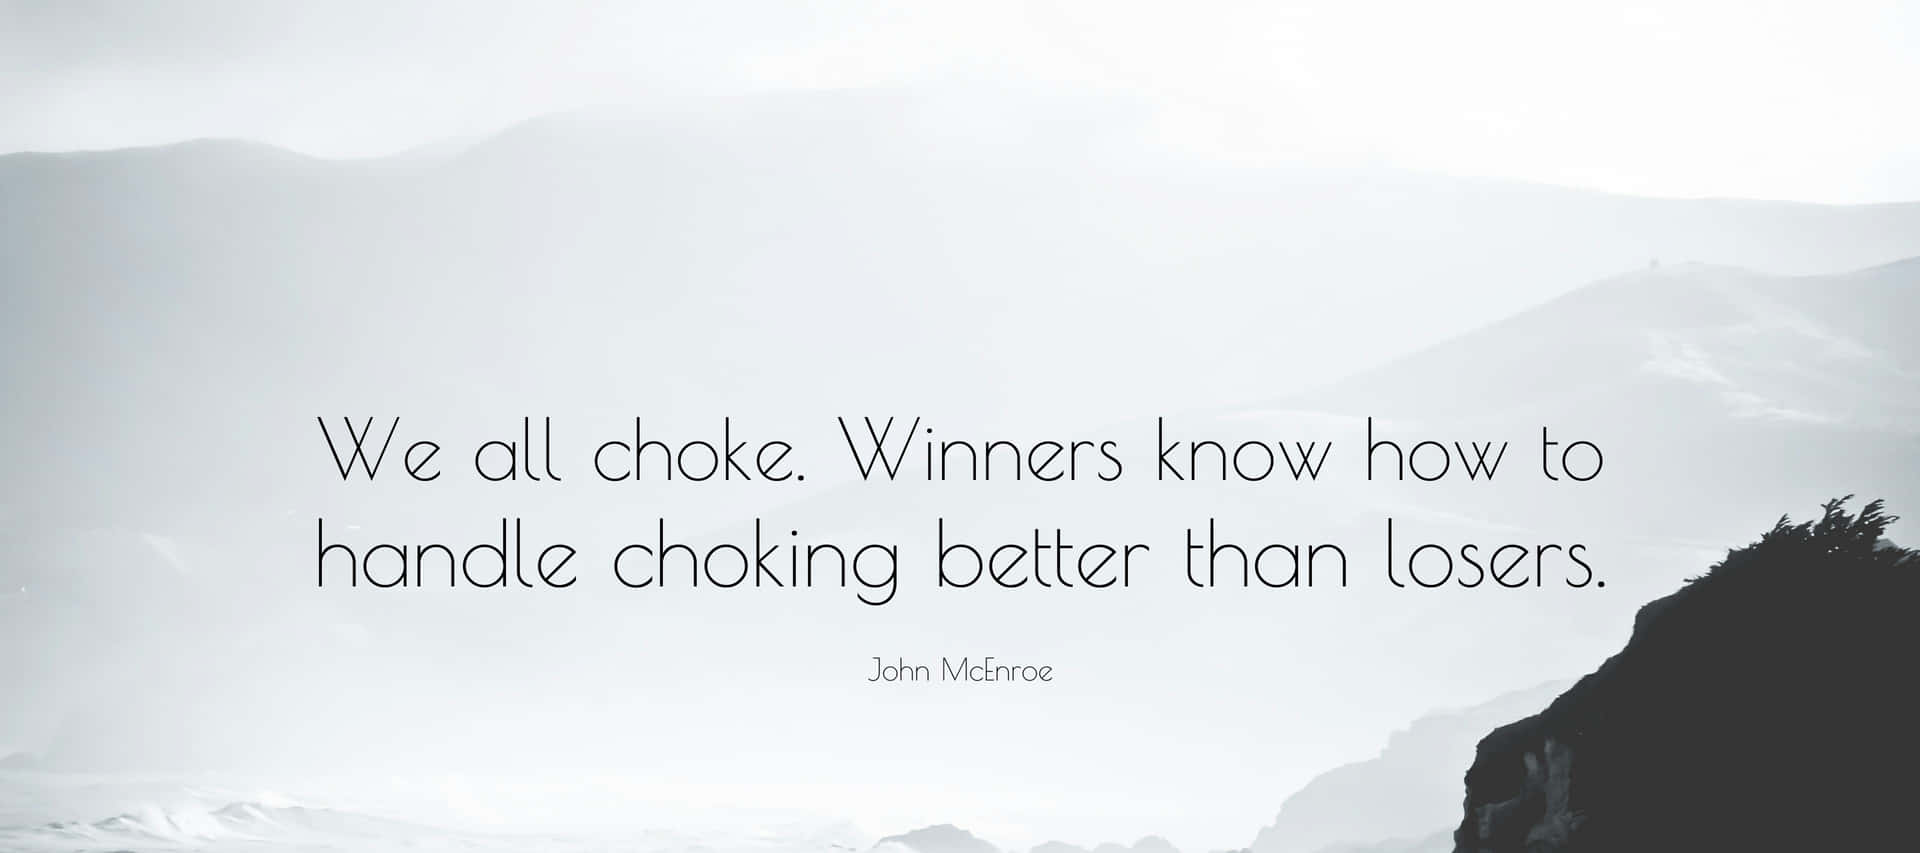 A Quote That Says We All Choose Winners How To Handle Chugging Better Than Losers Wallpaper